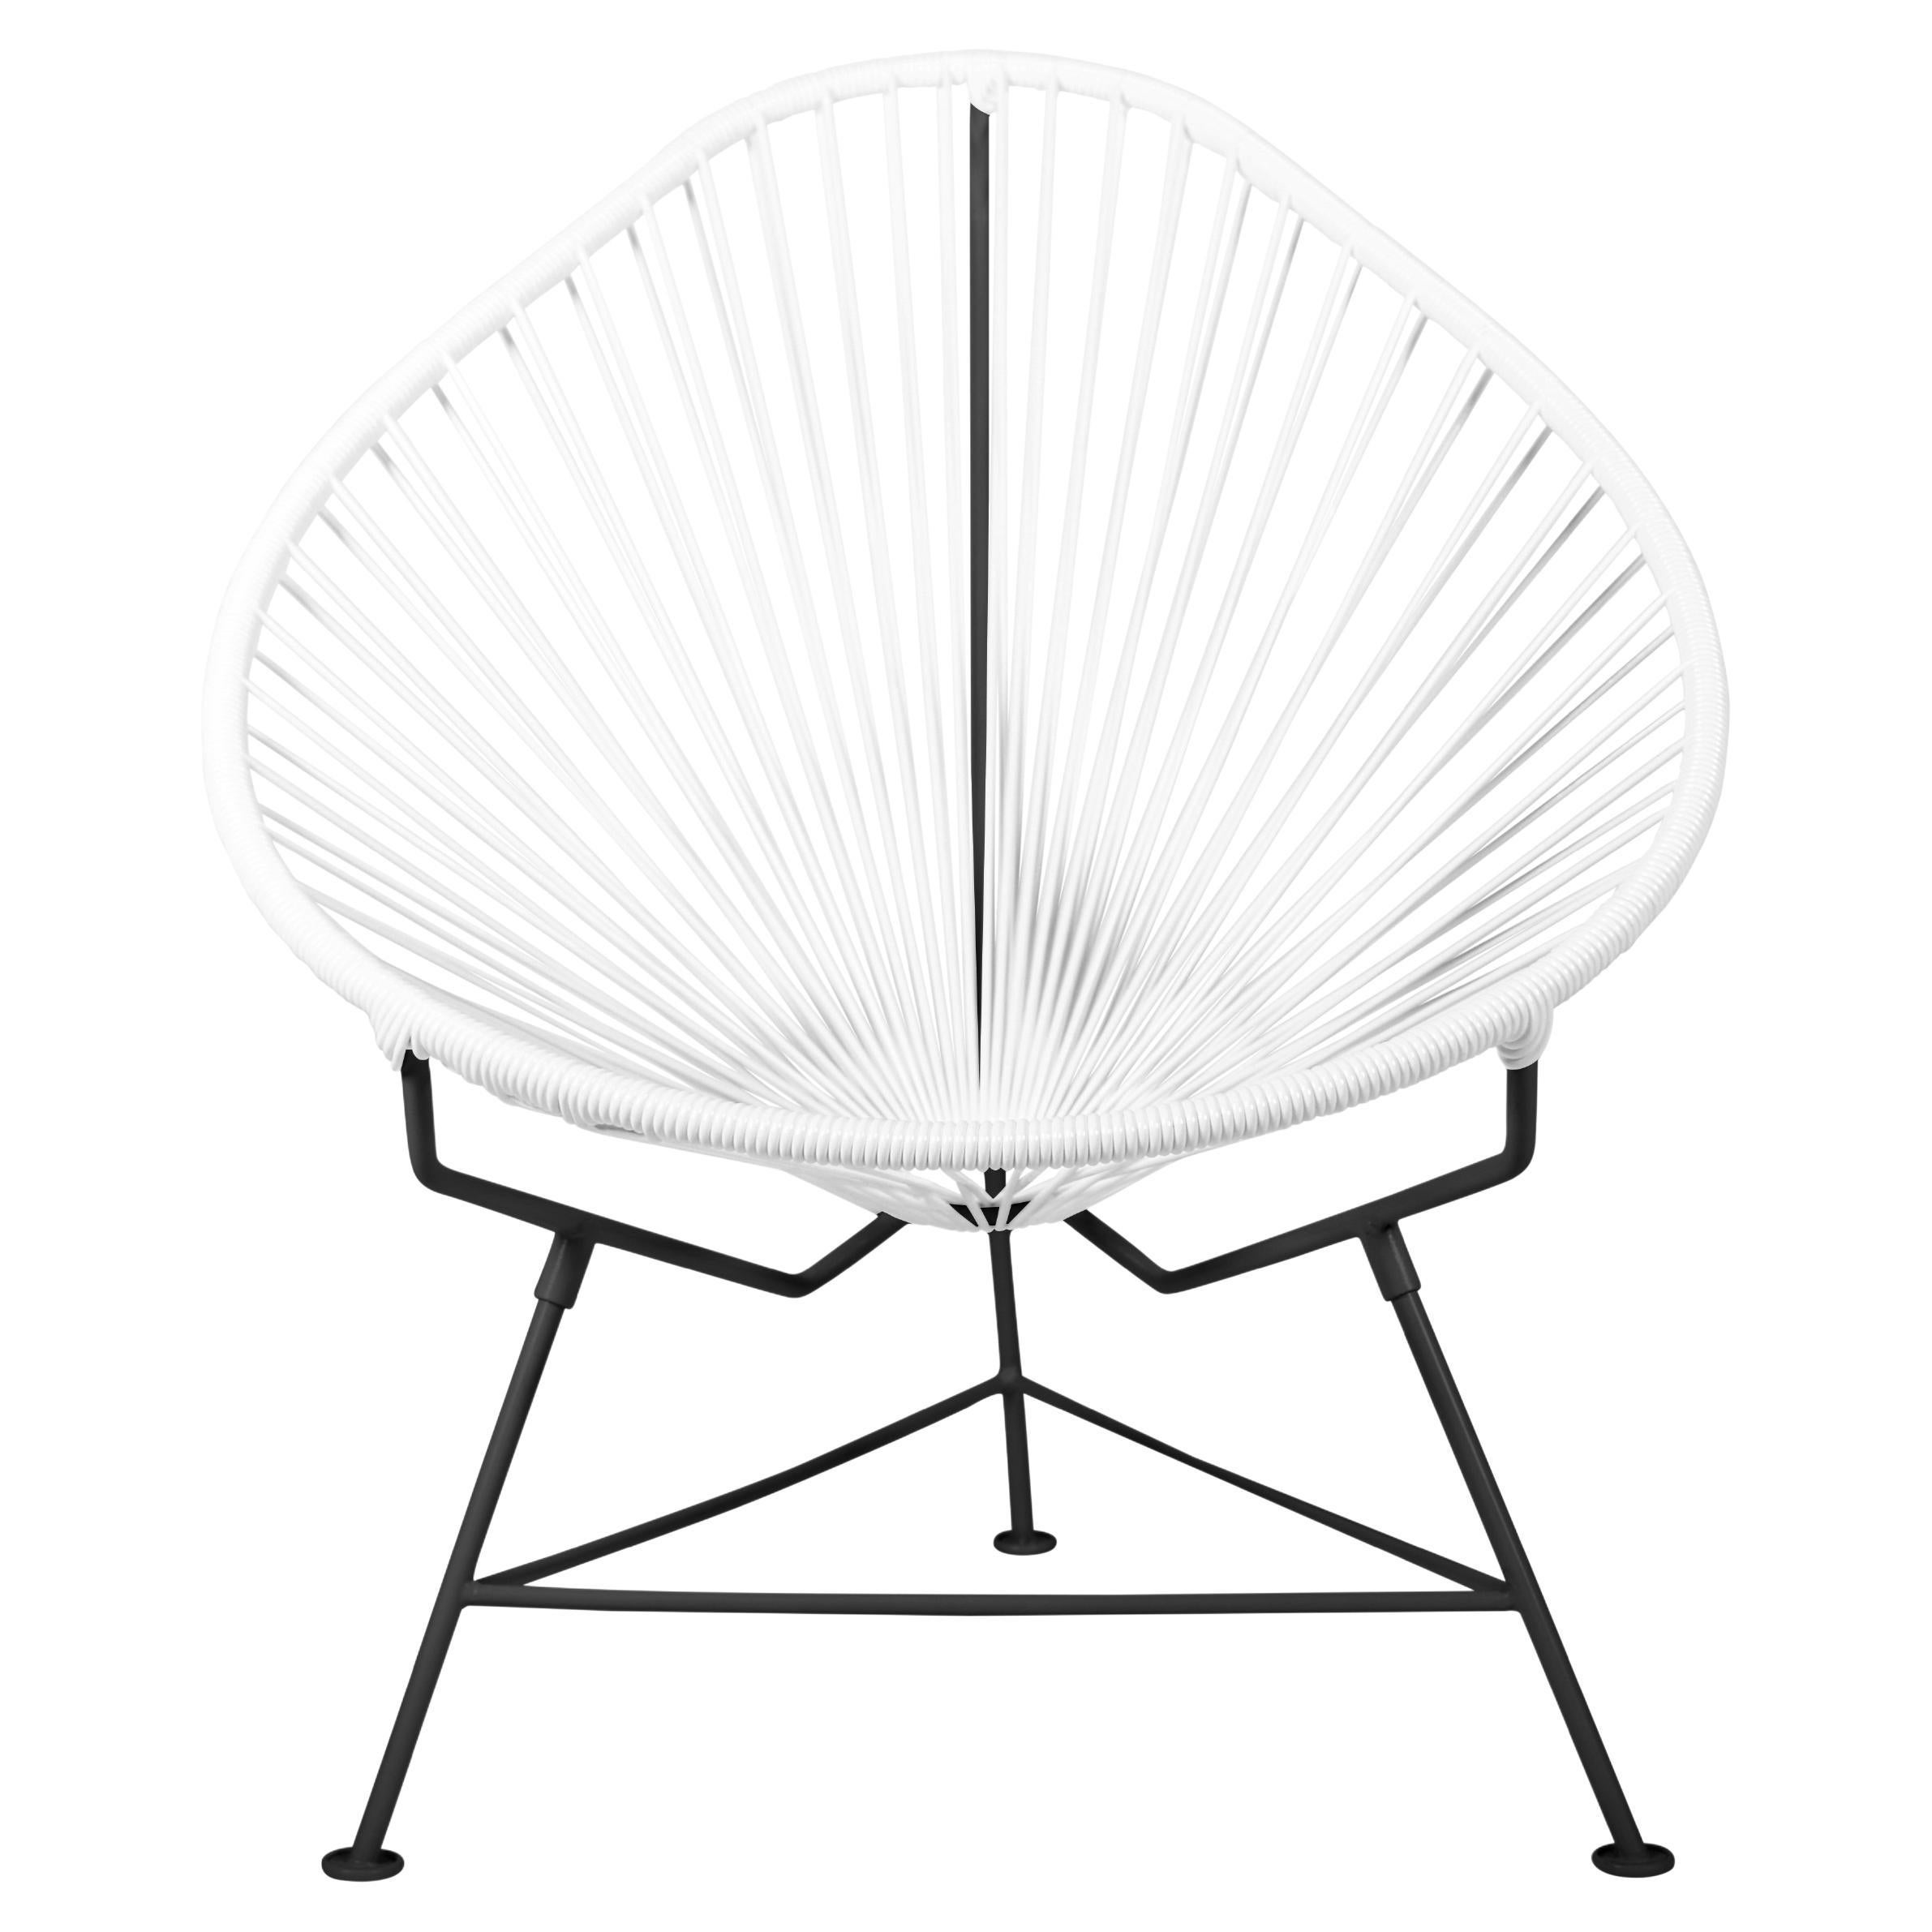 Innit Designs Acapulco Chair White Weave on Black Frame